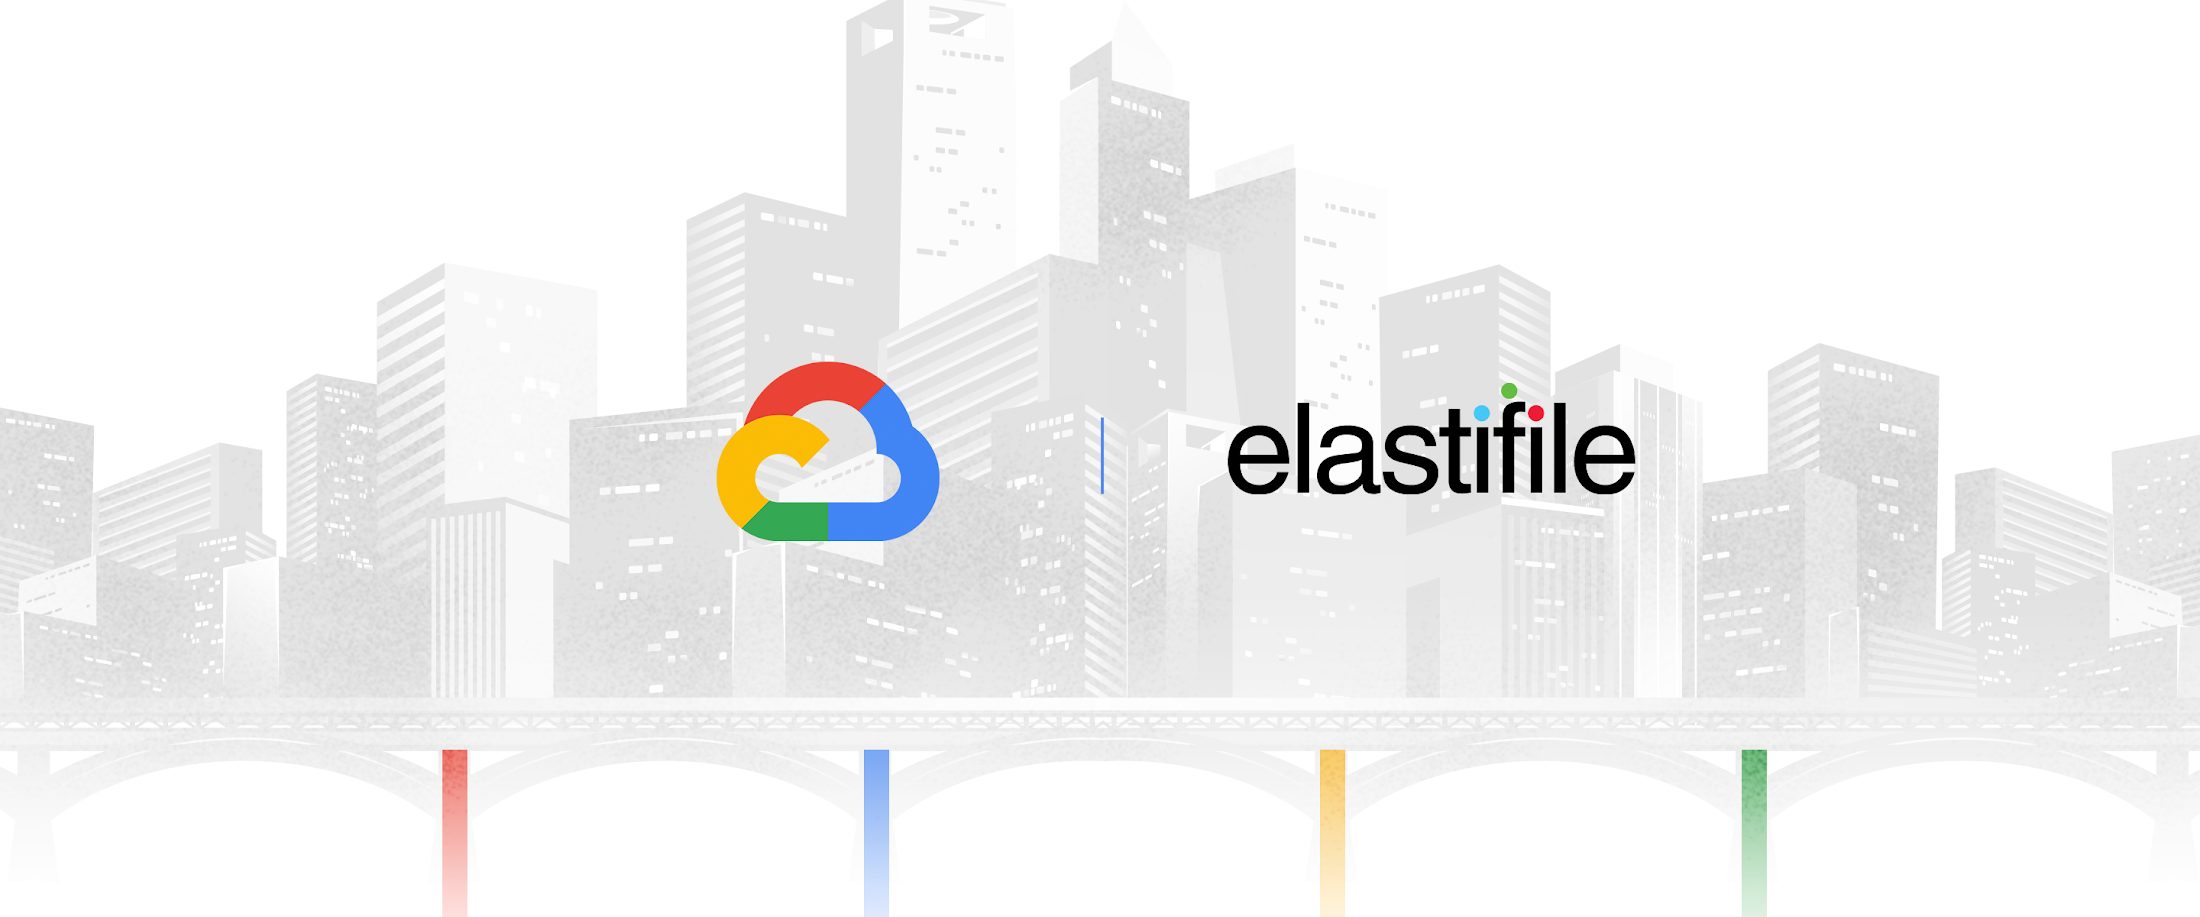 Google reached an agreement to acquire Elastifile